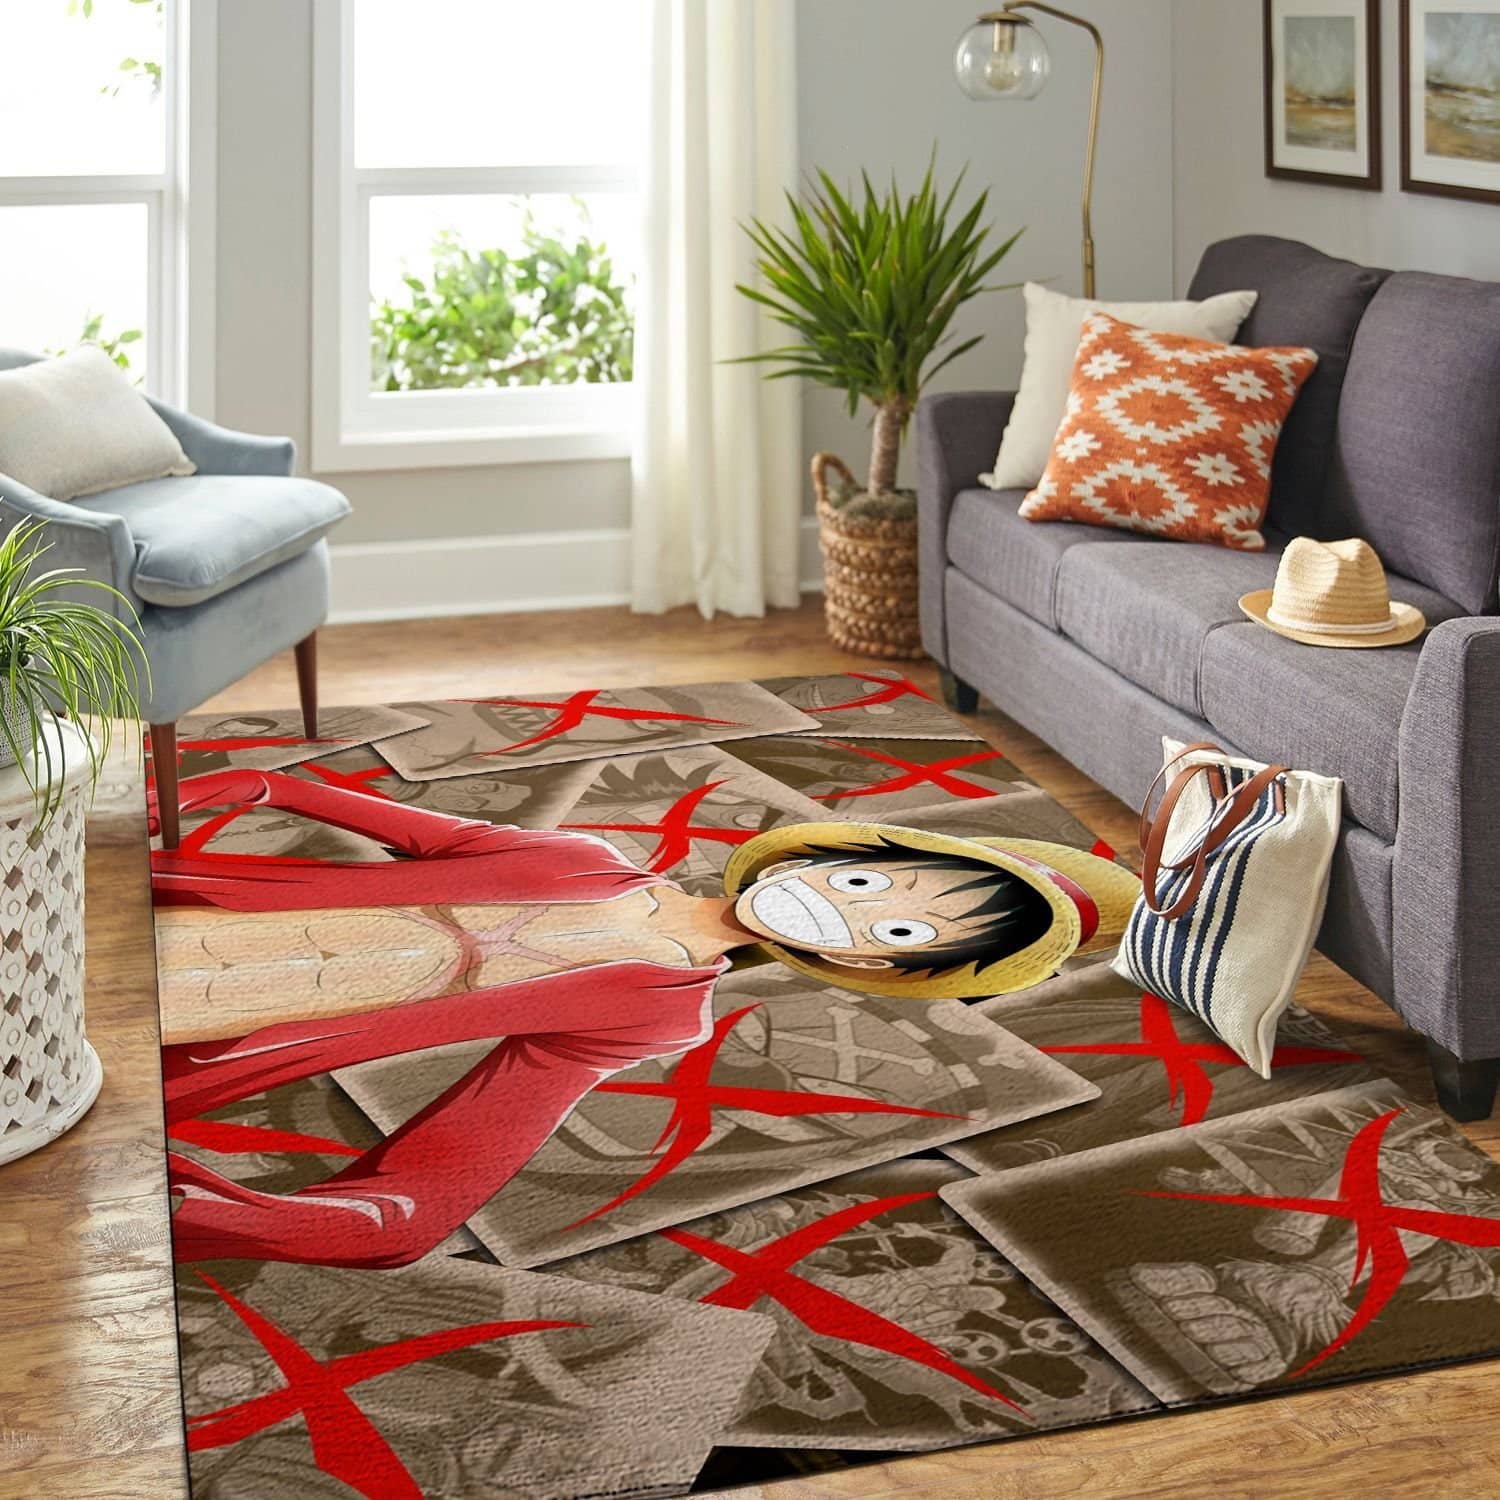 Amazon Onepiece-Luffy Living Room Area No6429 Rug